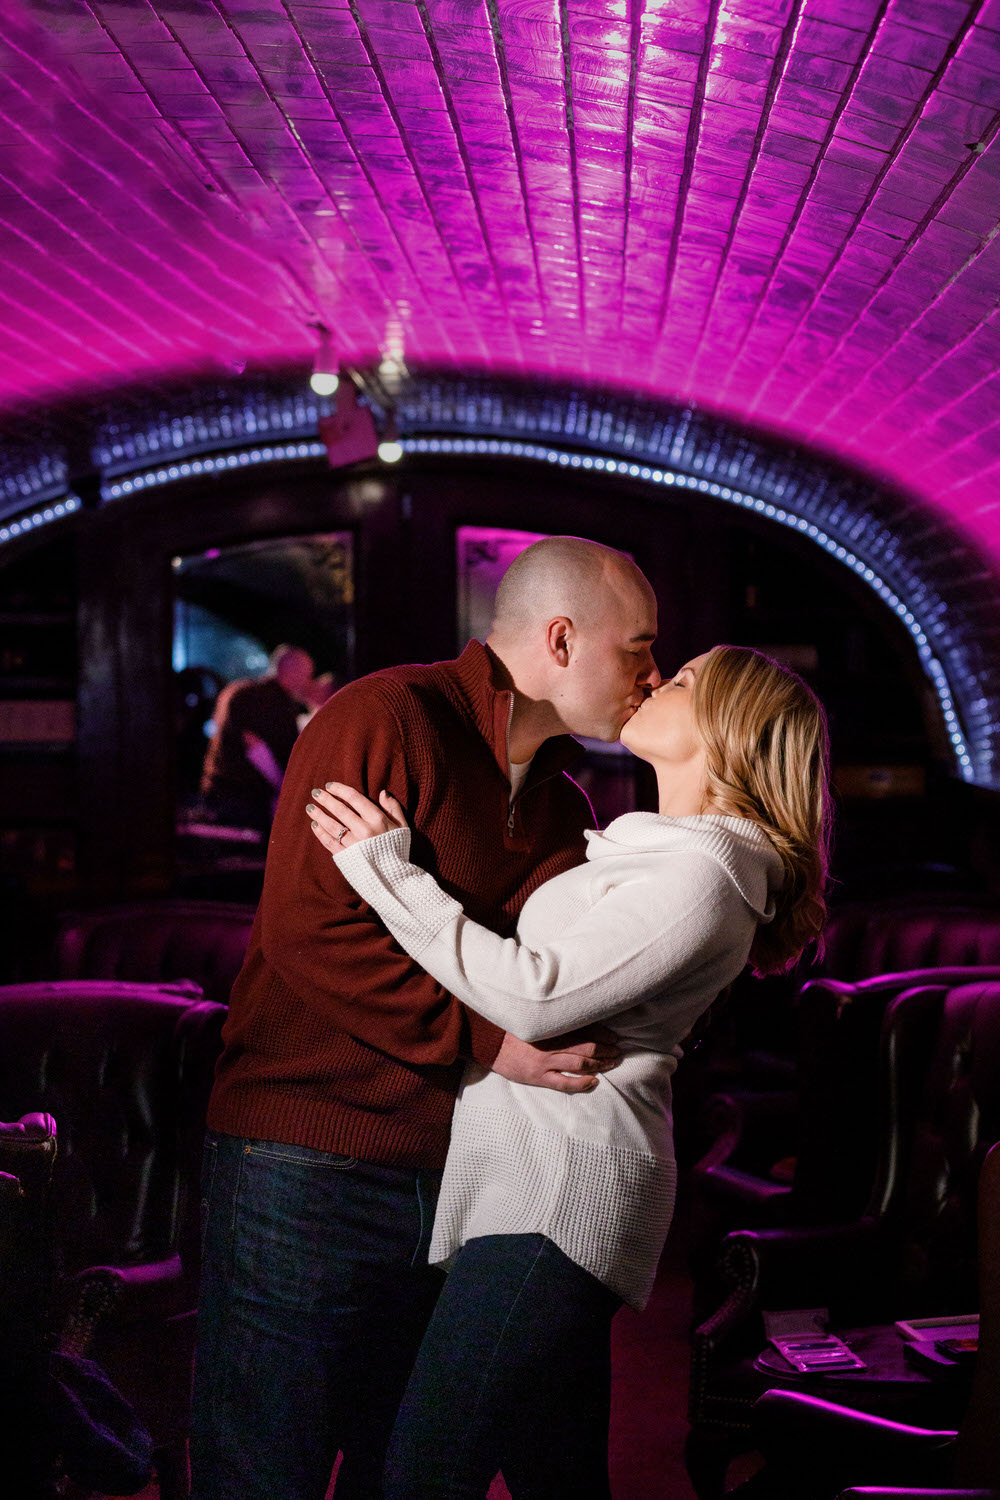 The tunnel bar engagement photo